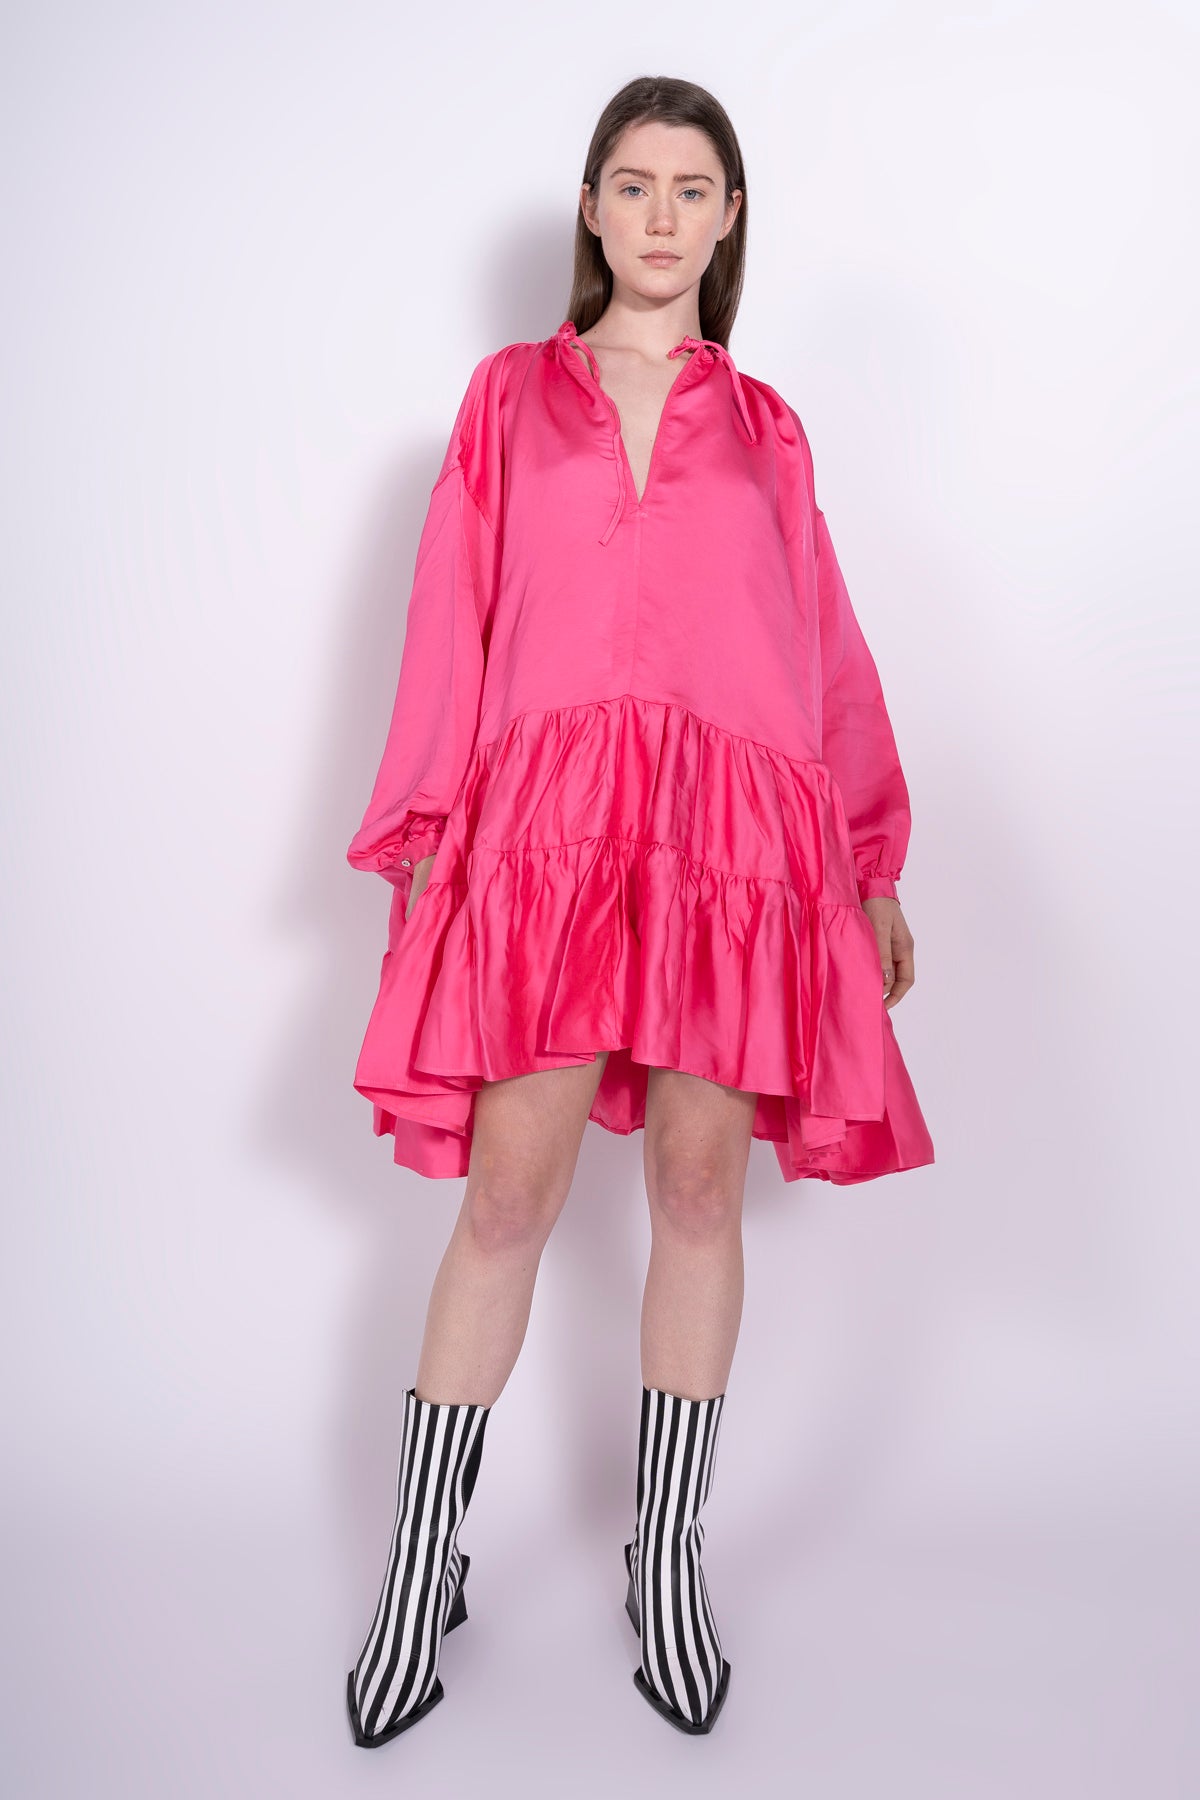 BRIGHT PINK OVERSIZED TIERED GATHERED DRESS MARQUES ALMEIDA